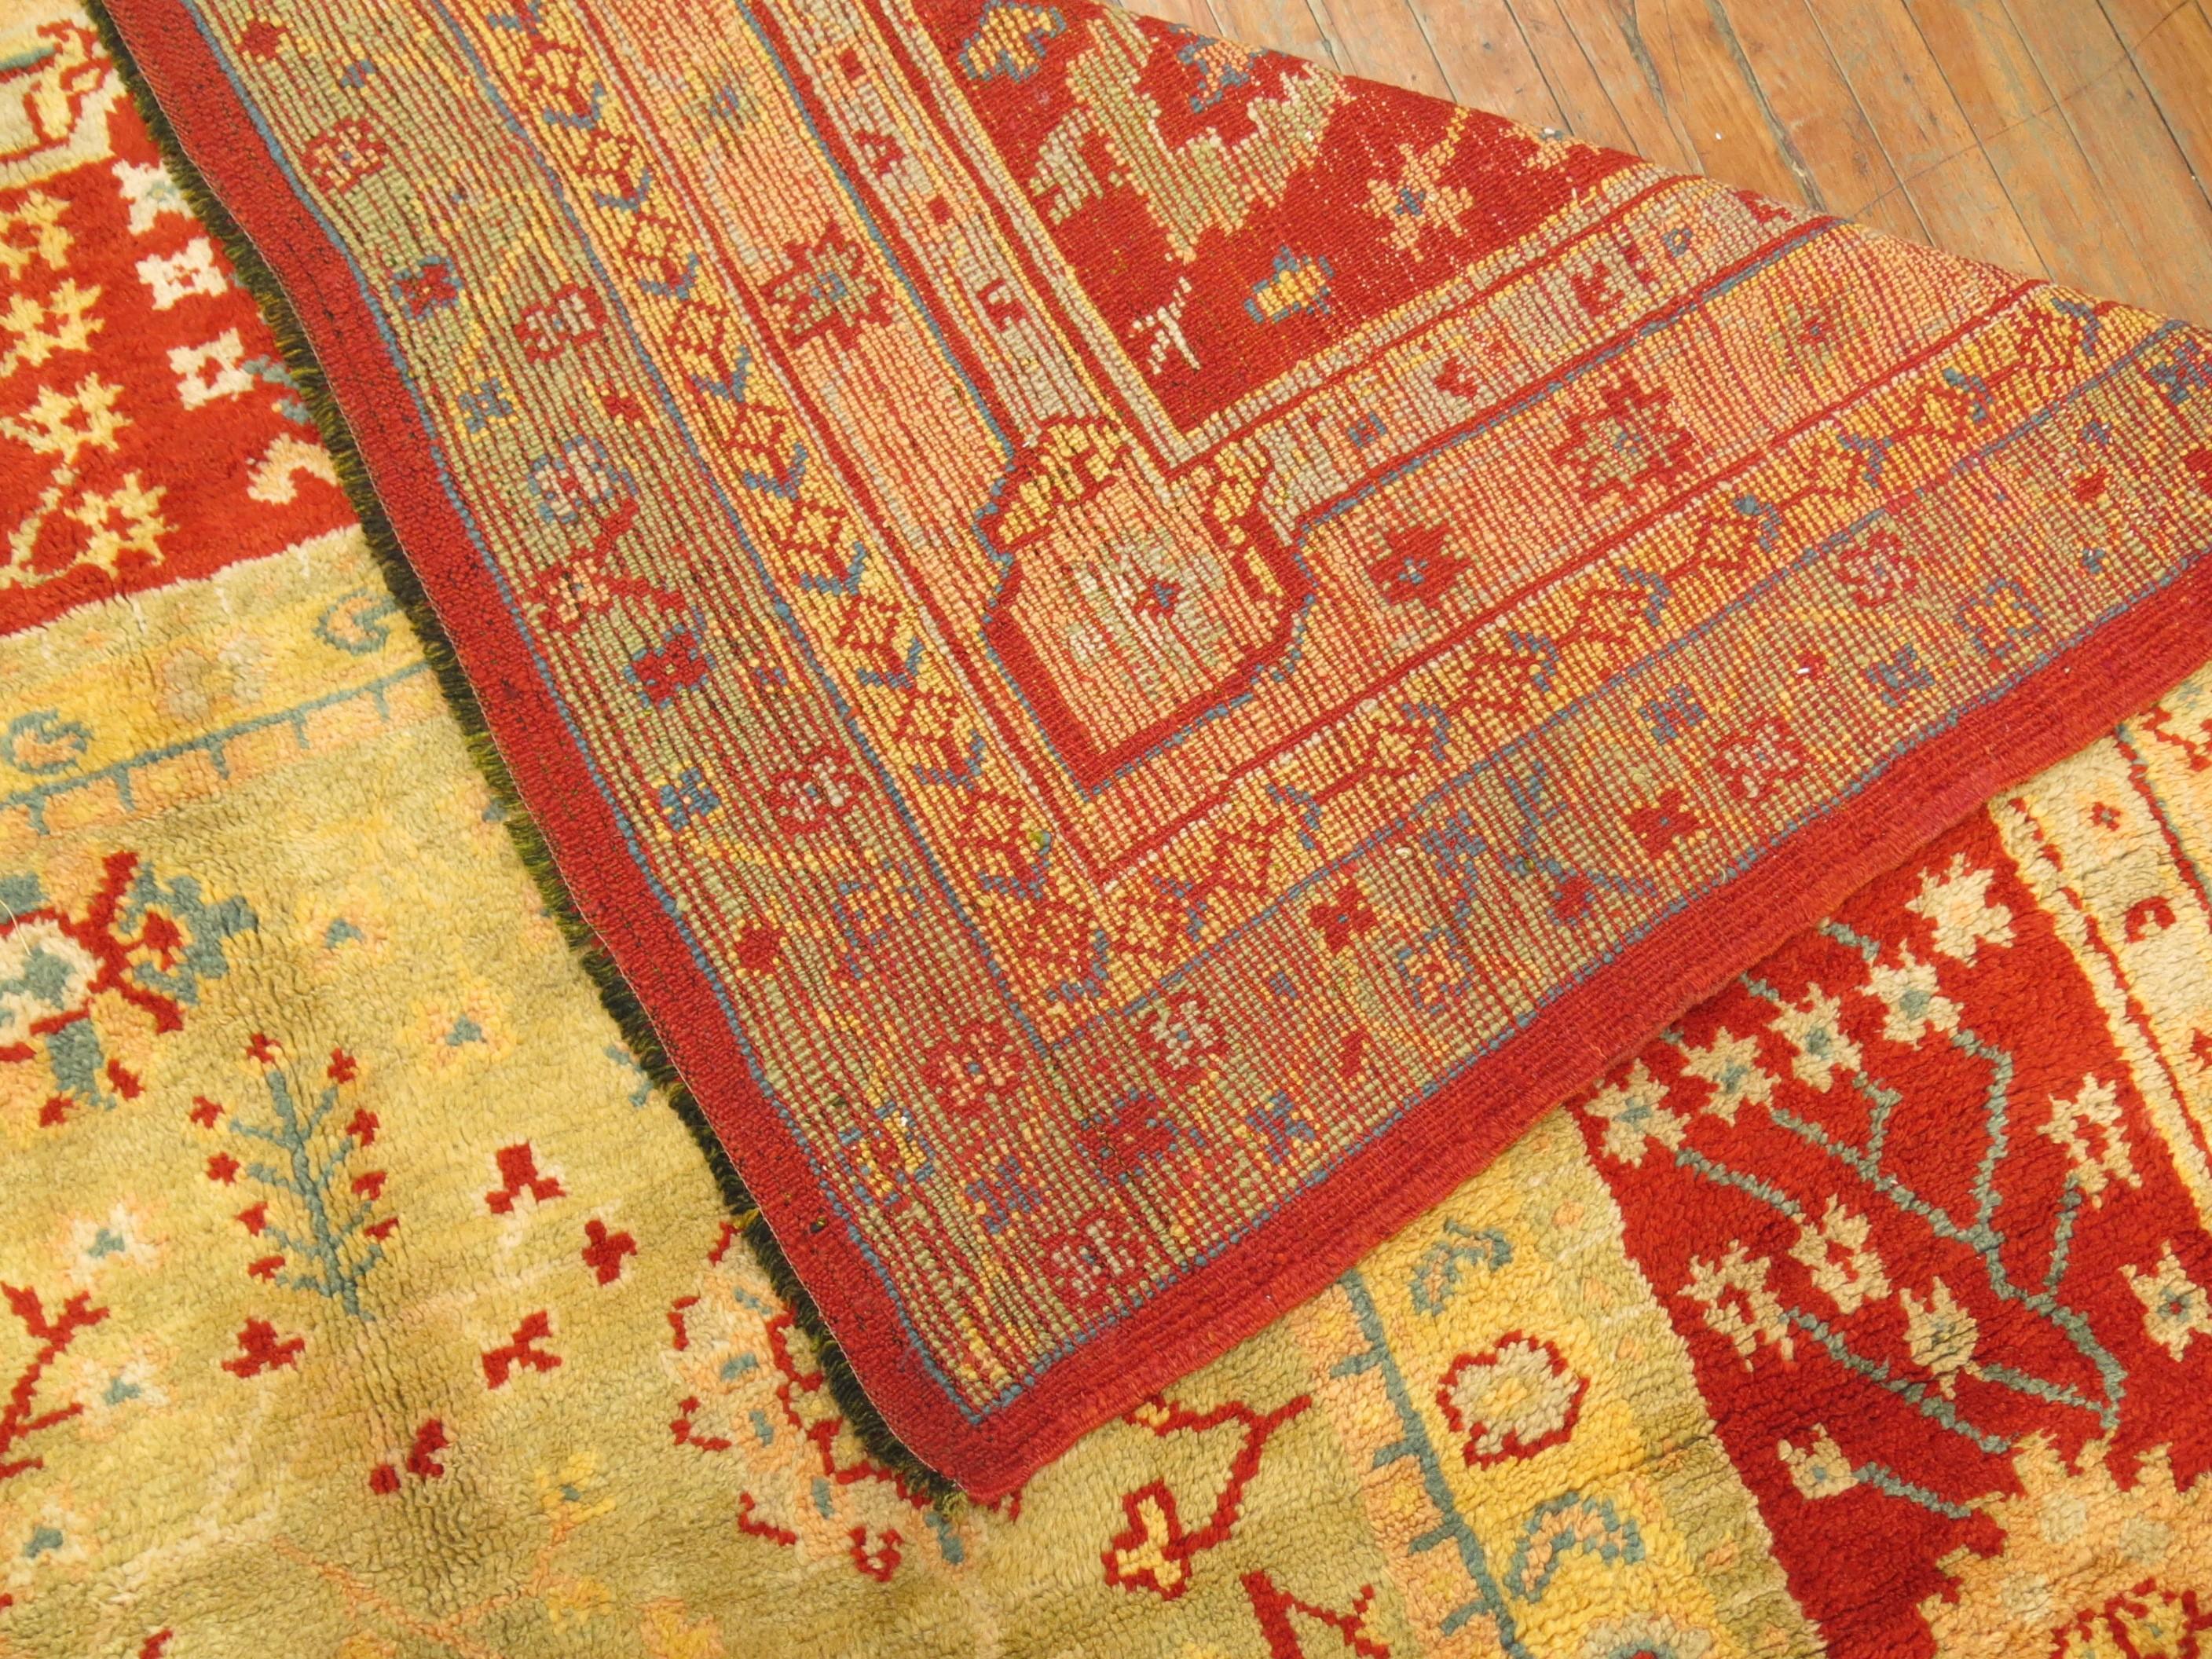 An early 20th century colorful palace size full pile condition antique Turkish Oushak rug.
The texture and full pile condition on this rug is un-parallel. Absolutely no issues with the rug as previous owner kept it in a well preserved state for